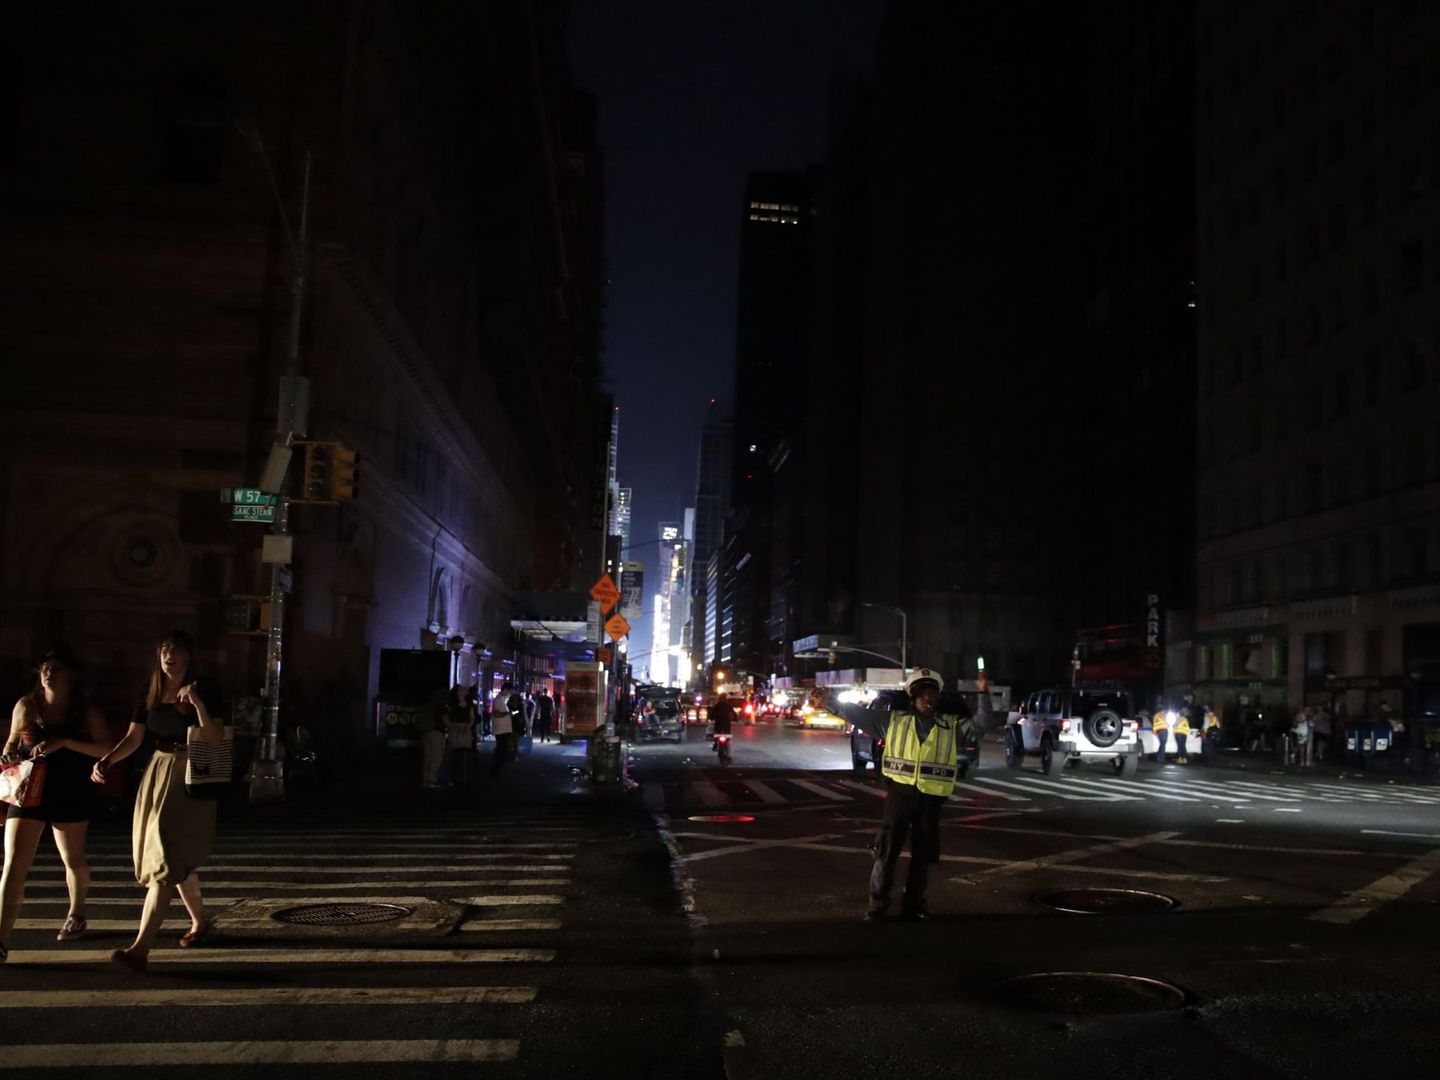 New York (United States), 14 07 2019.- People are seen walking on 7th Avenue near Carnagie Hall in Manhattan during a blackout in New York, USA, 13 July 2019. According to reports, an area suffered a blackout due to a transformer fire, trapping peopl